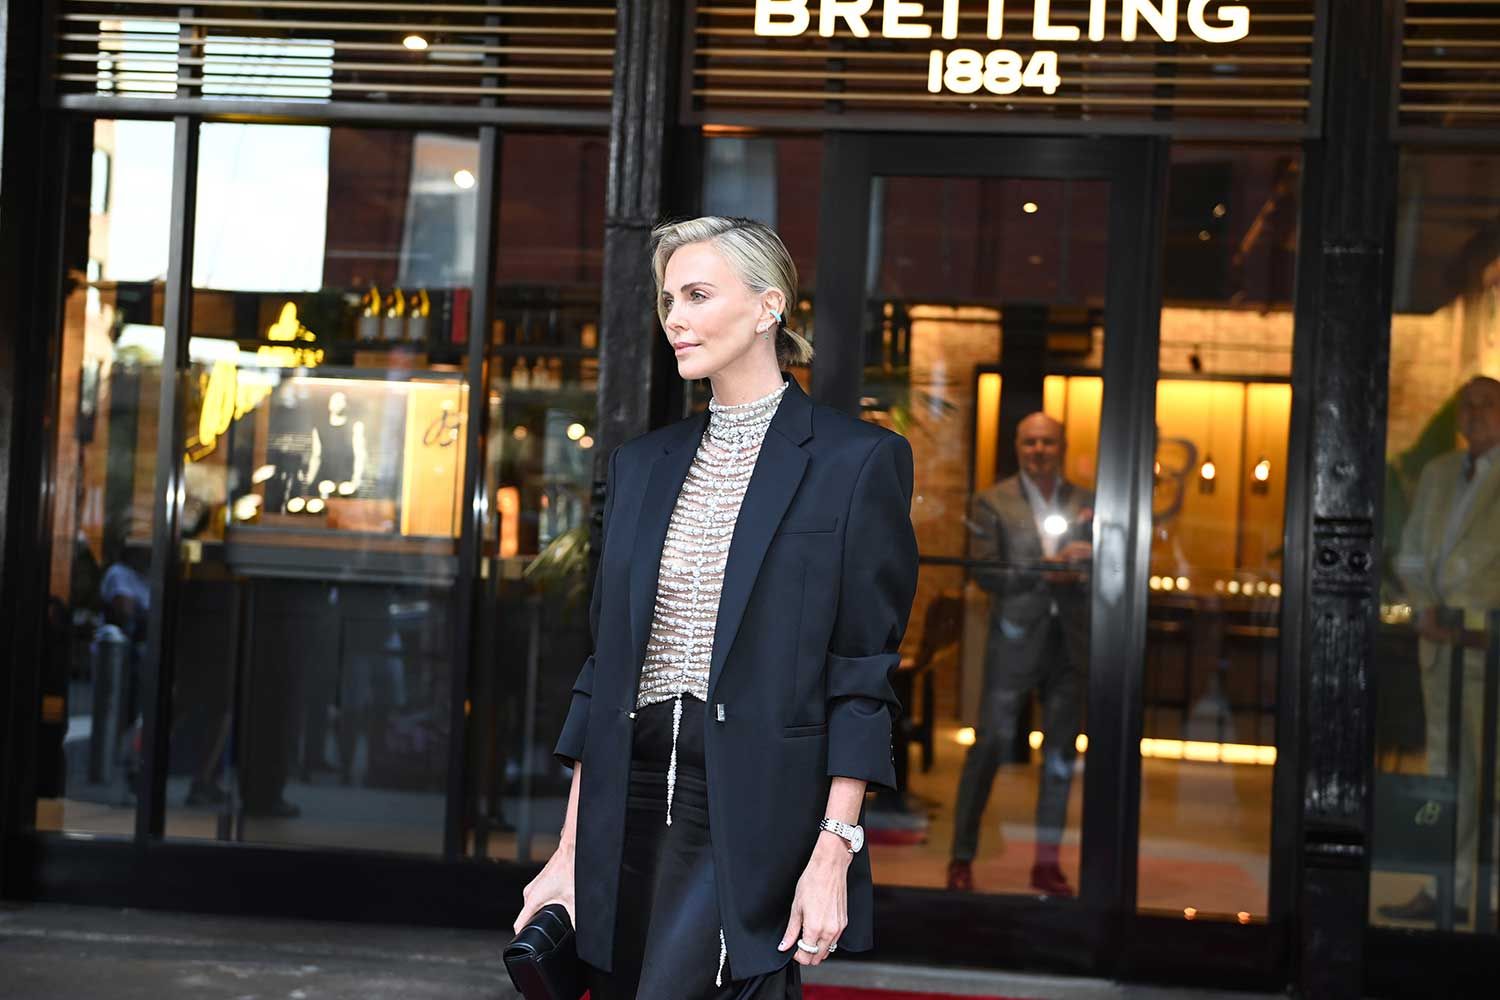 Charlize Theron (Image: Breitling)